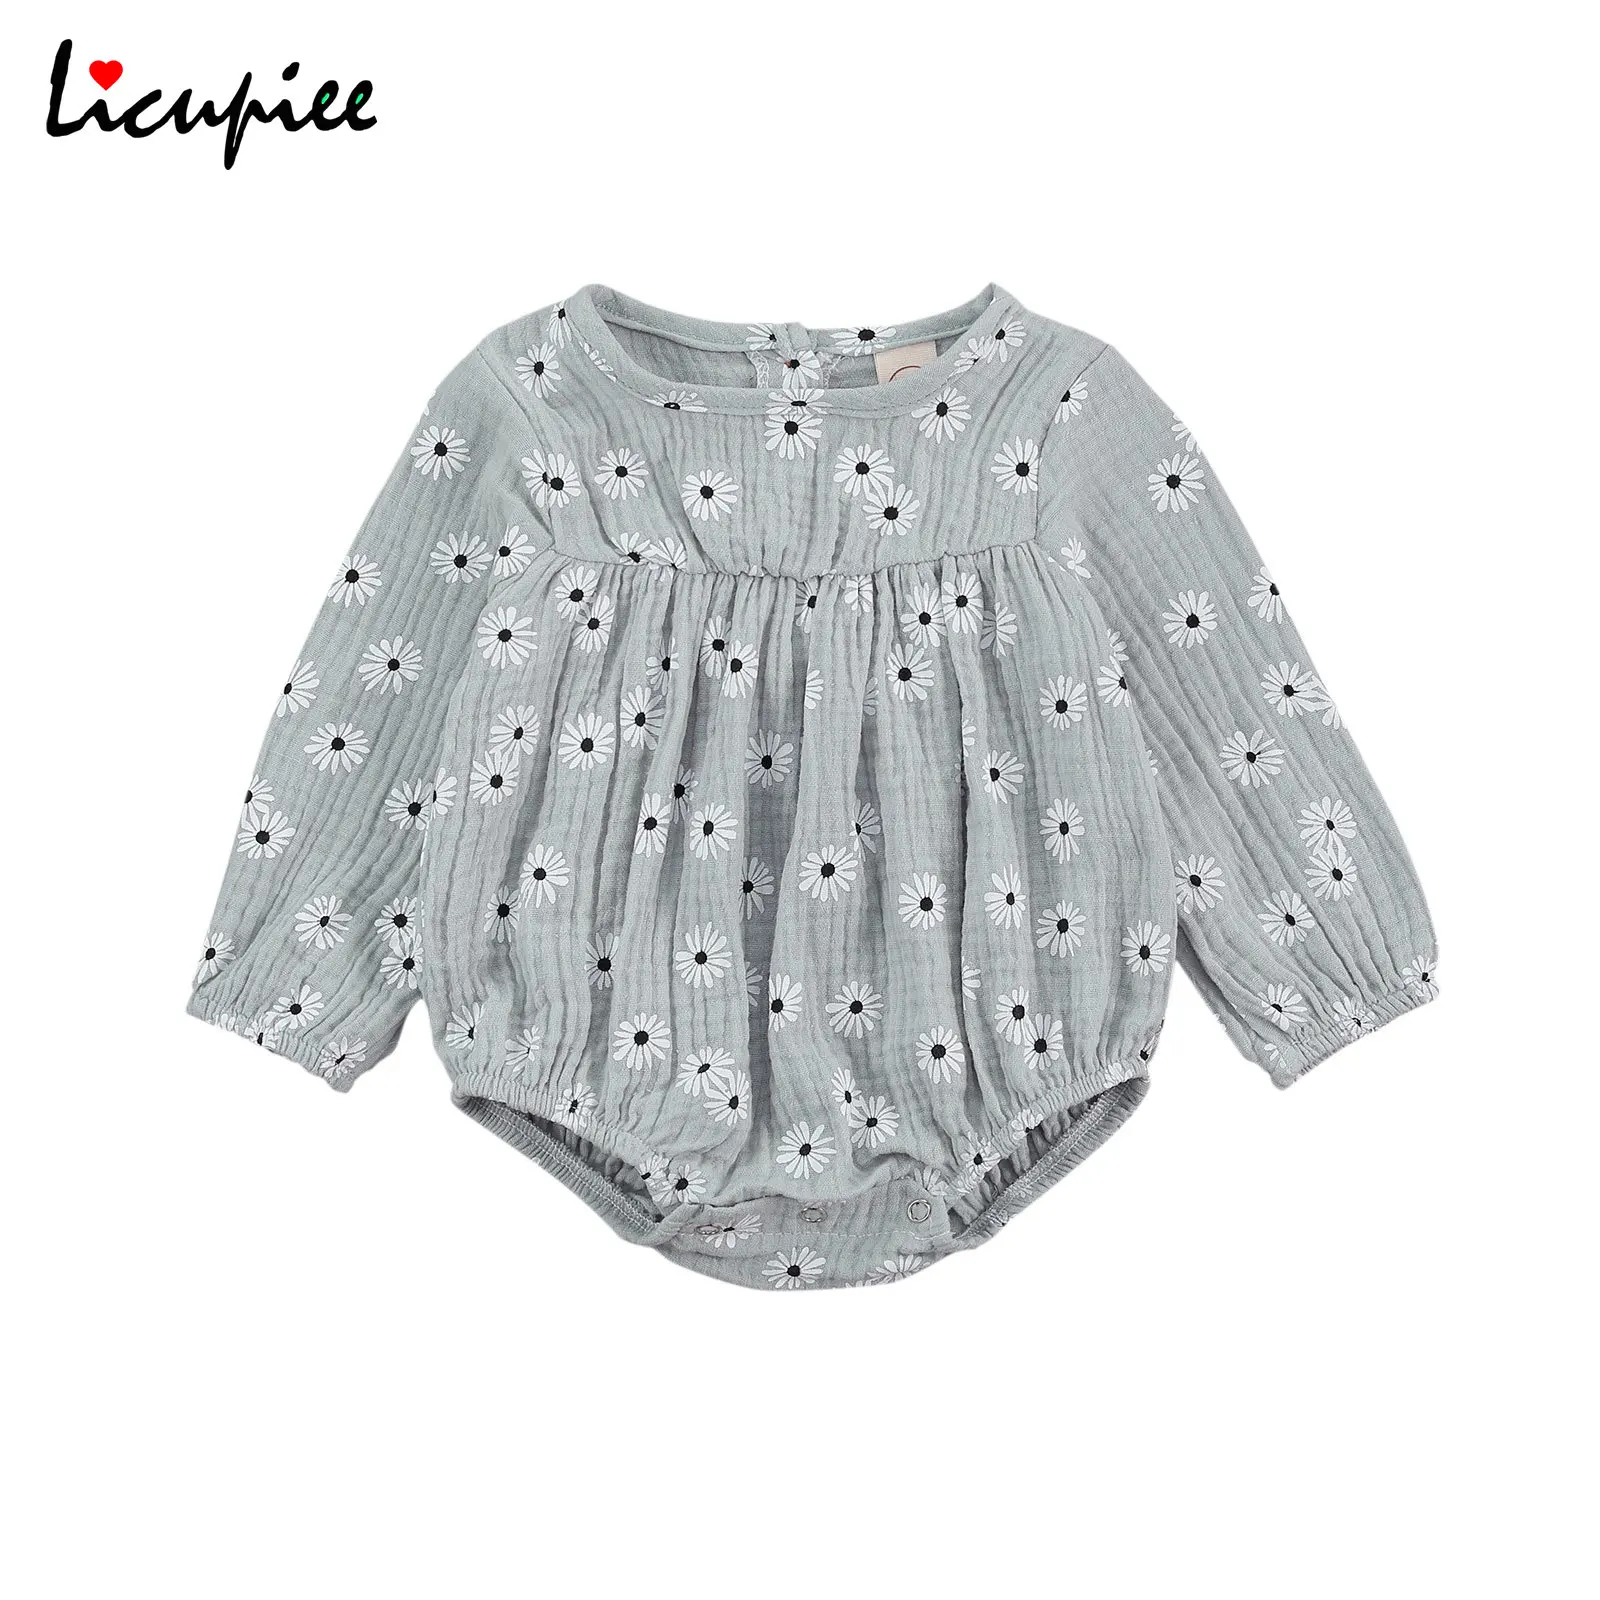 

Baby Print Bodysuit Fashion Casual Newborn Casual Style Romper, Toddler Long Sleeve Round Neck Daisy Print Playsuit 0-18 Months